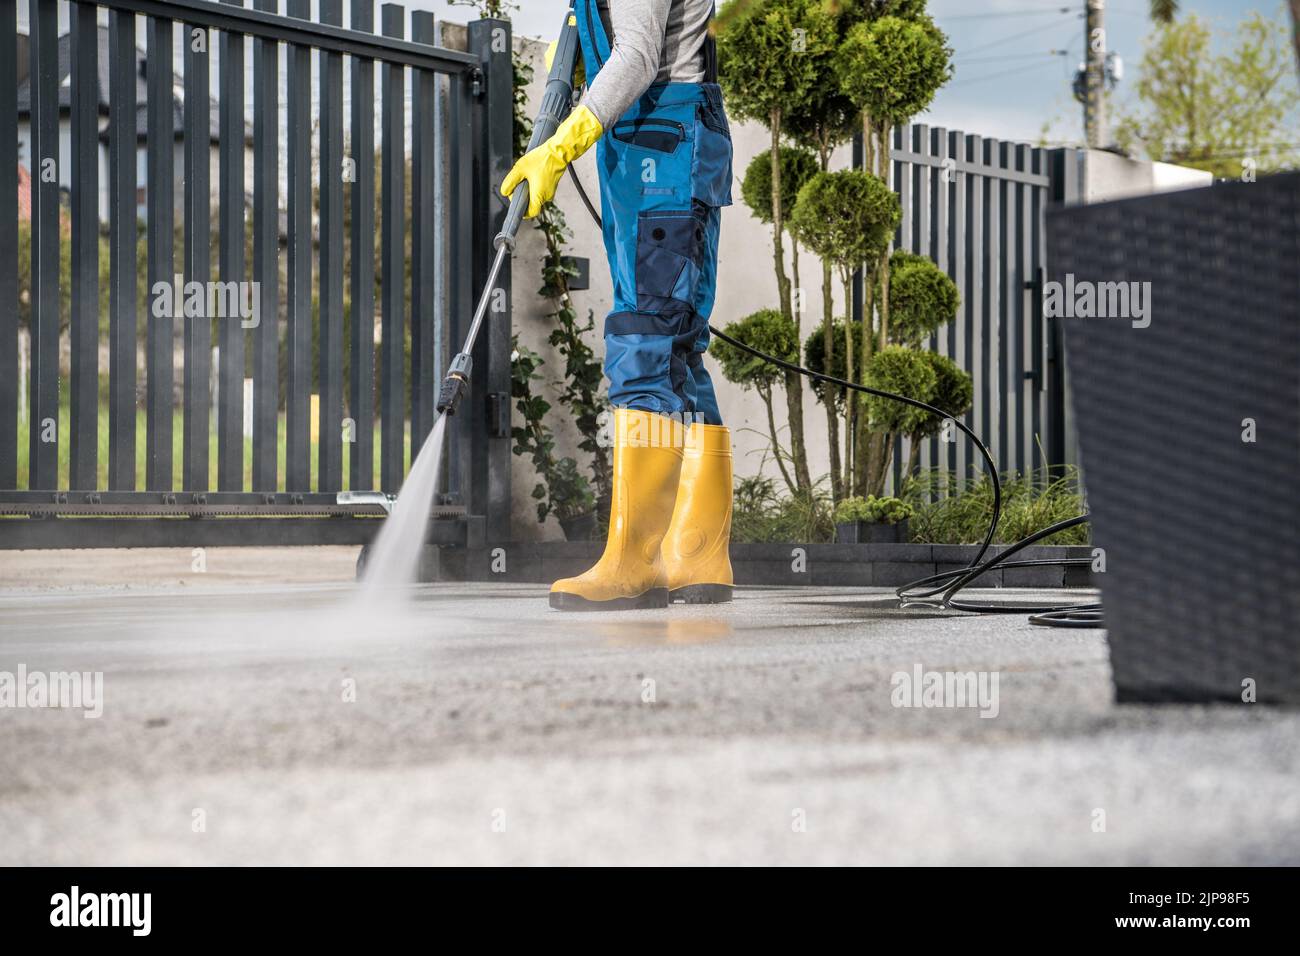 Man in Yellow Rain Boots and Work Uniform Pressure Washing Concrete Tiles of the Driveway to His House Behind the Closed Yard Entrance Gate. Home Surr Stock Photo